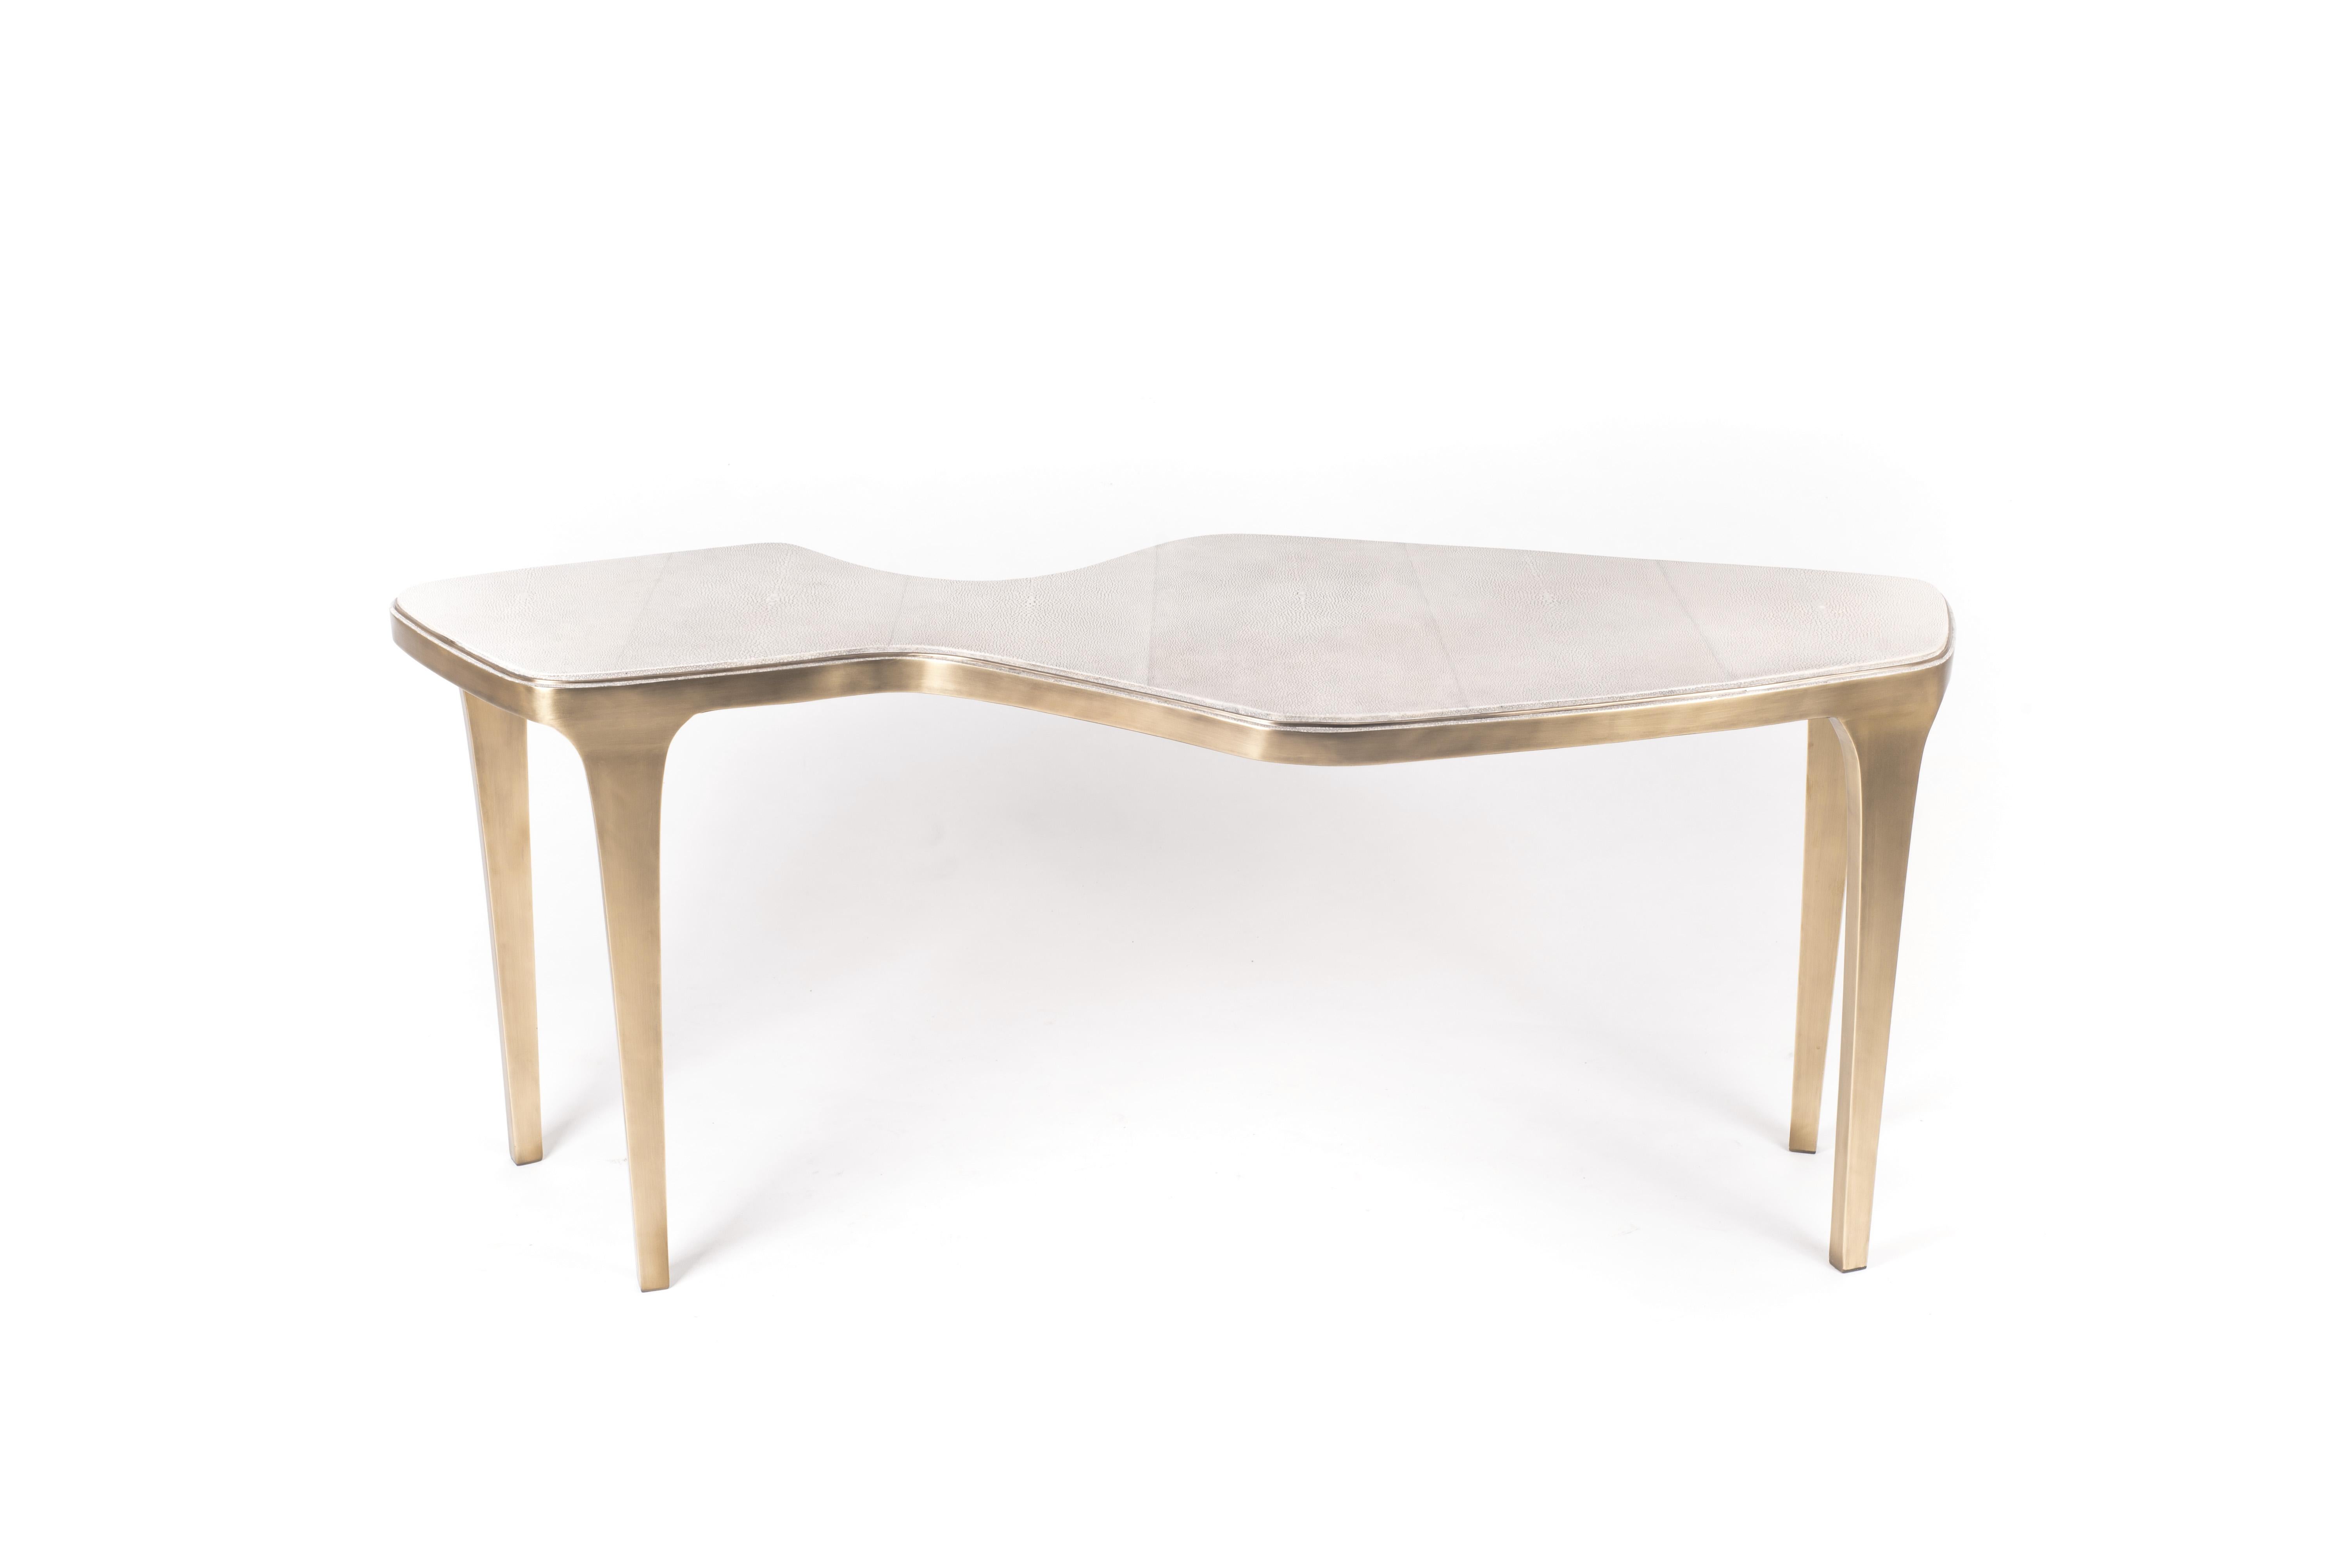 The cosmos nesting coffee tables are both Minimalist and dramatic. The top is inlaid in cream shagreen in the large size, patagonia semi precious stone in the medium size and smokey white quartz l in the small size, that is hand-dyed by artisans,